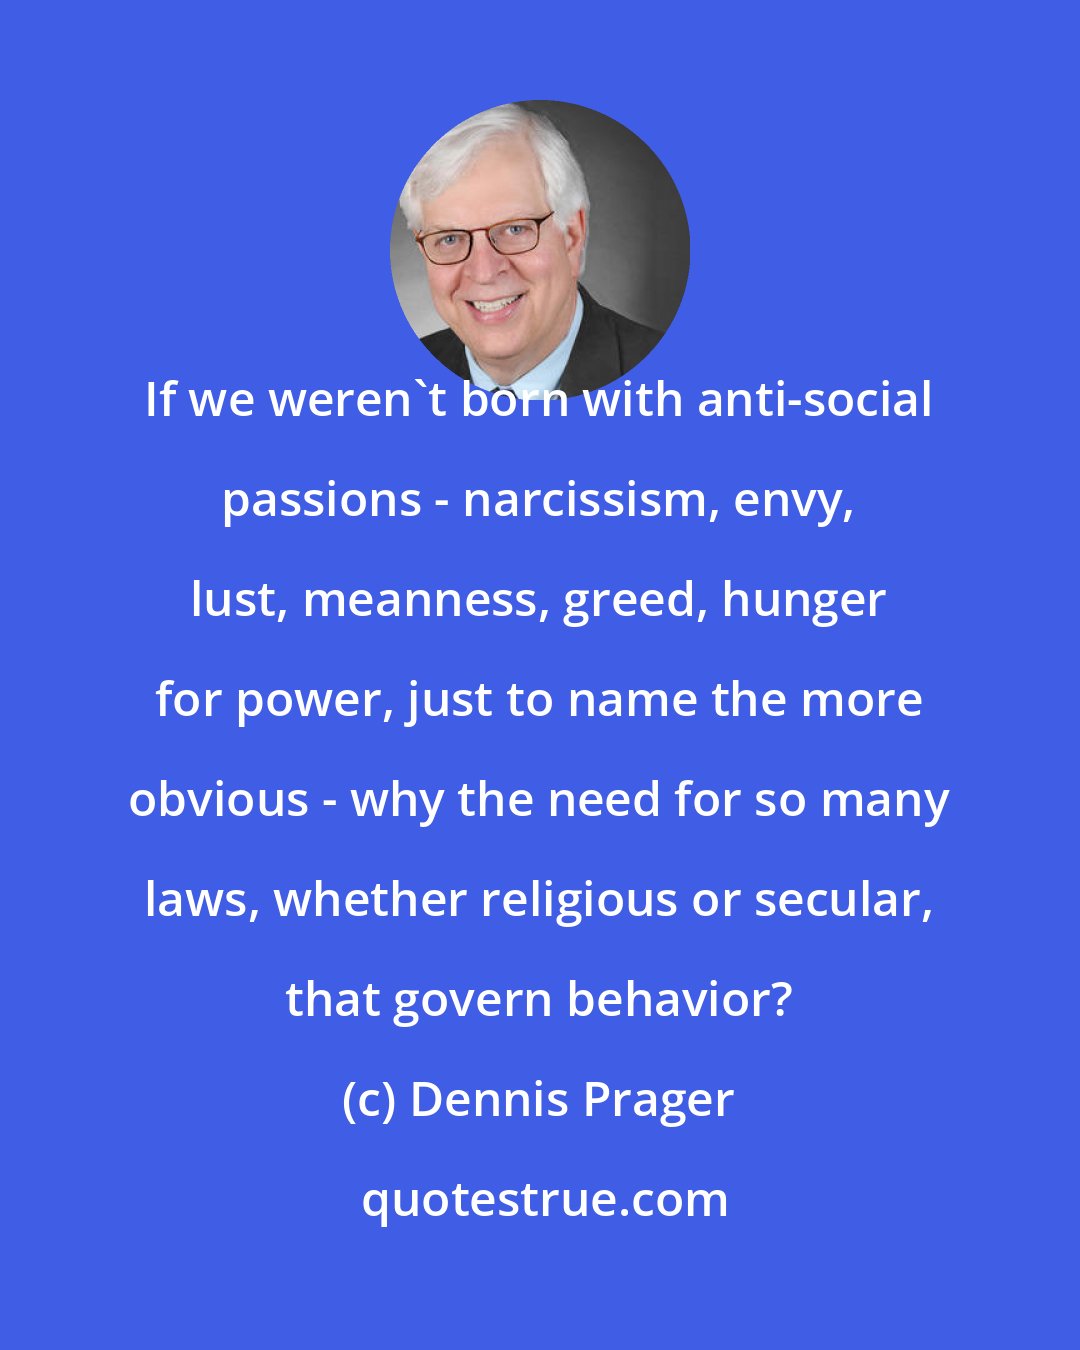 Dennis Prager: If we weren't born with anti-social passions - narcissism, envy, lust, meanness, greed, hunger for power, just to name the more obvious - why the need for so many laws, whether religious or secular, that govern behavior?